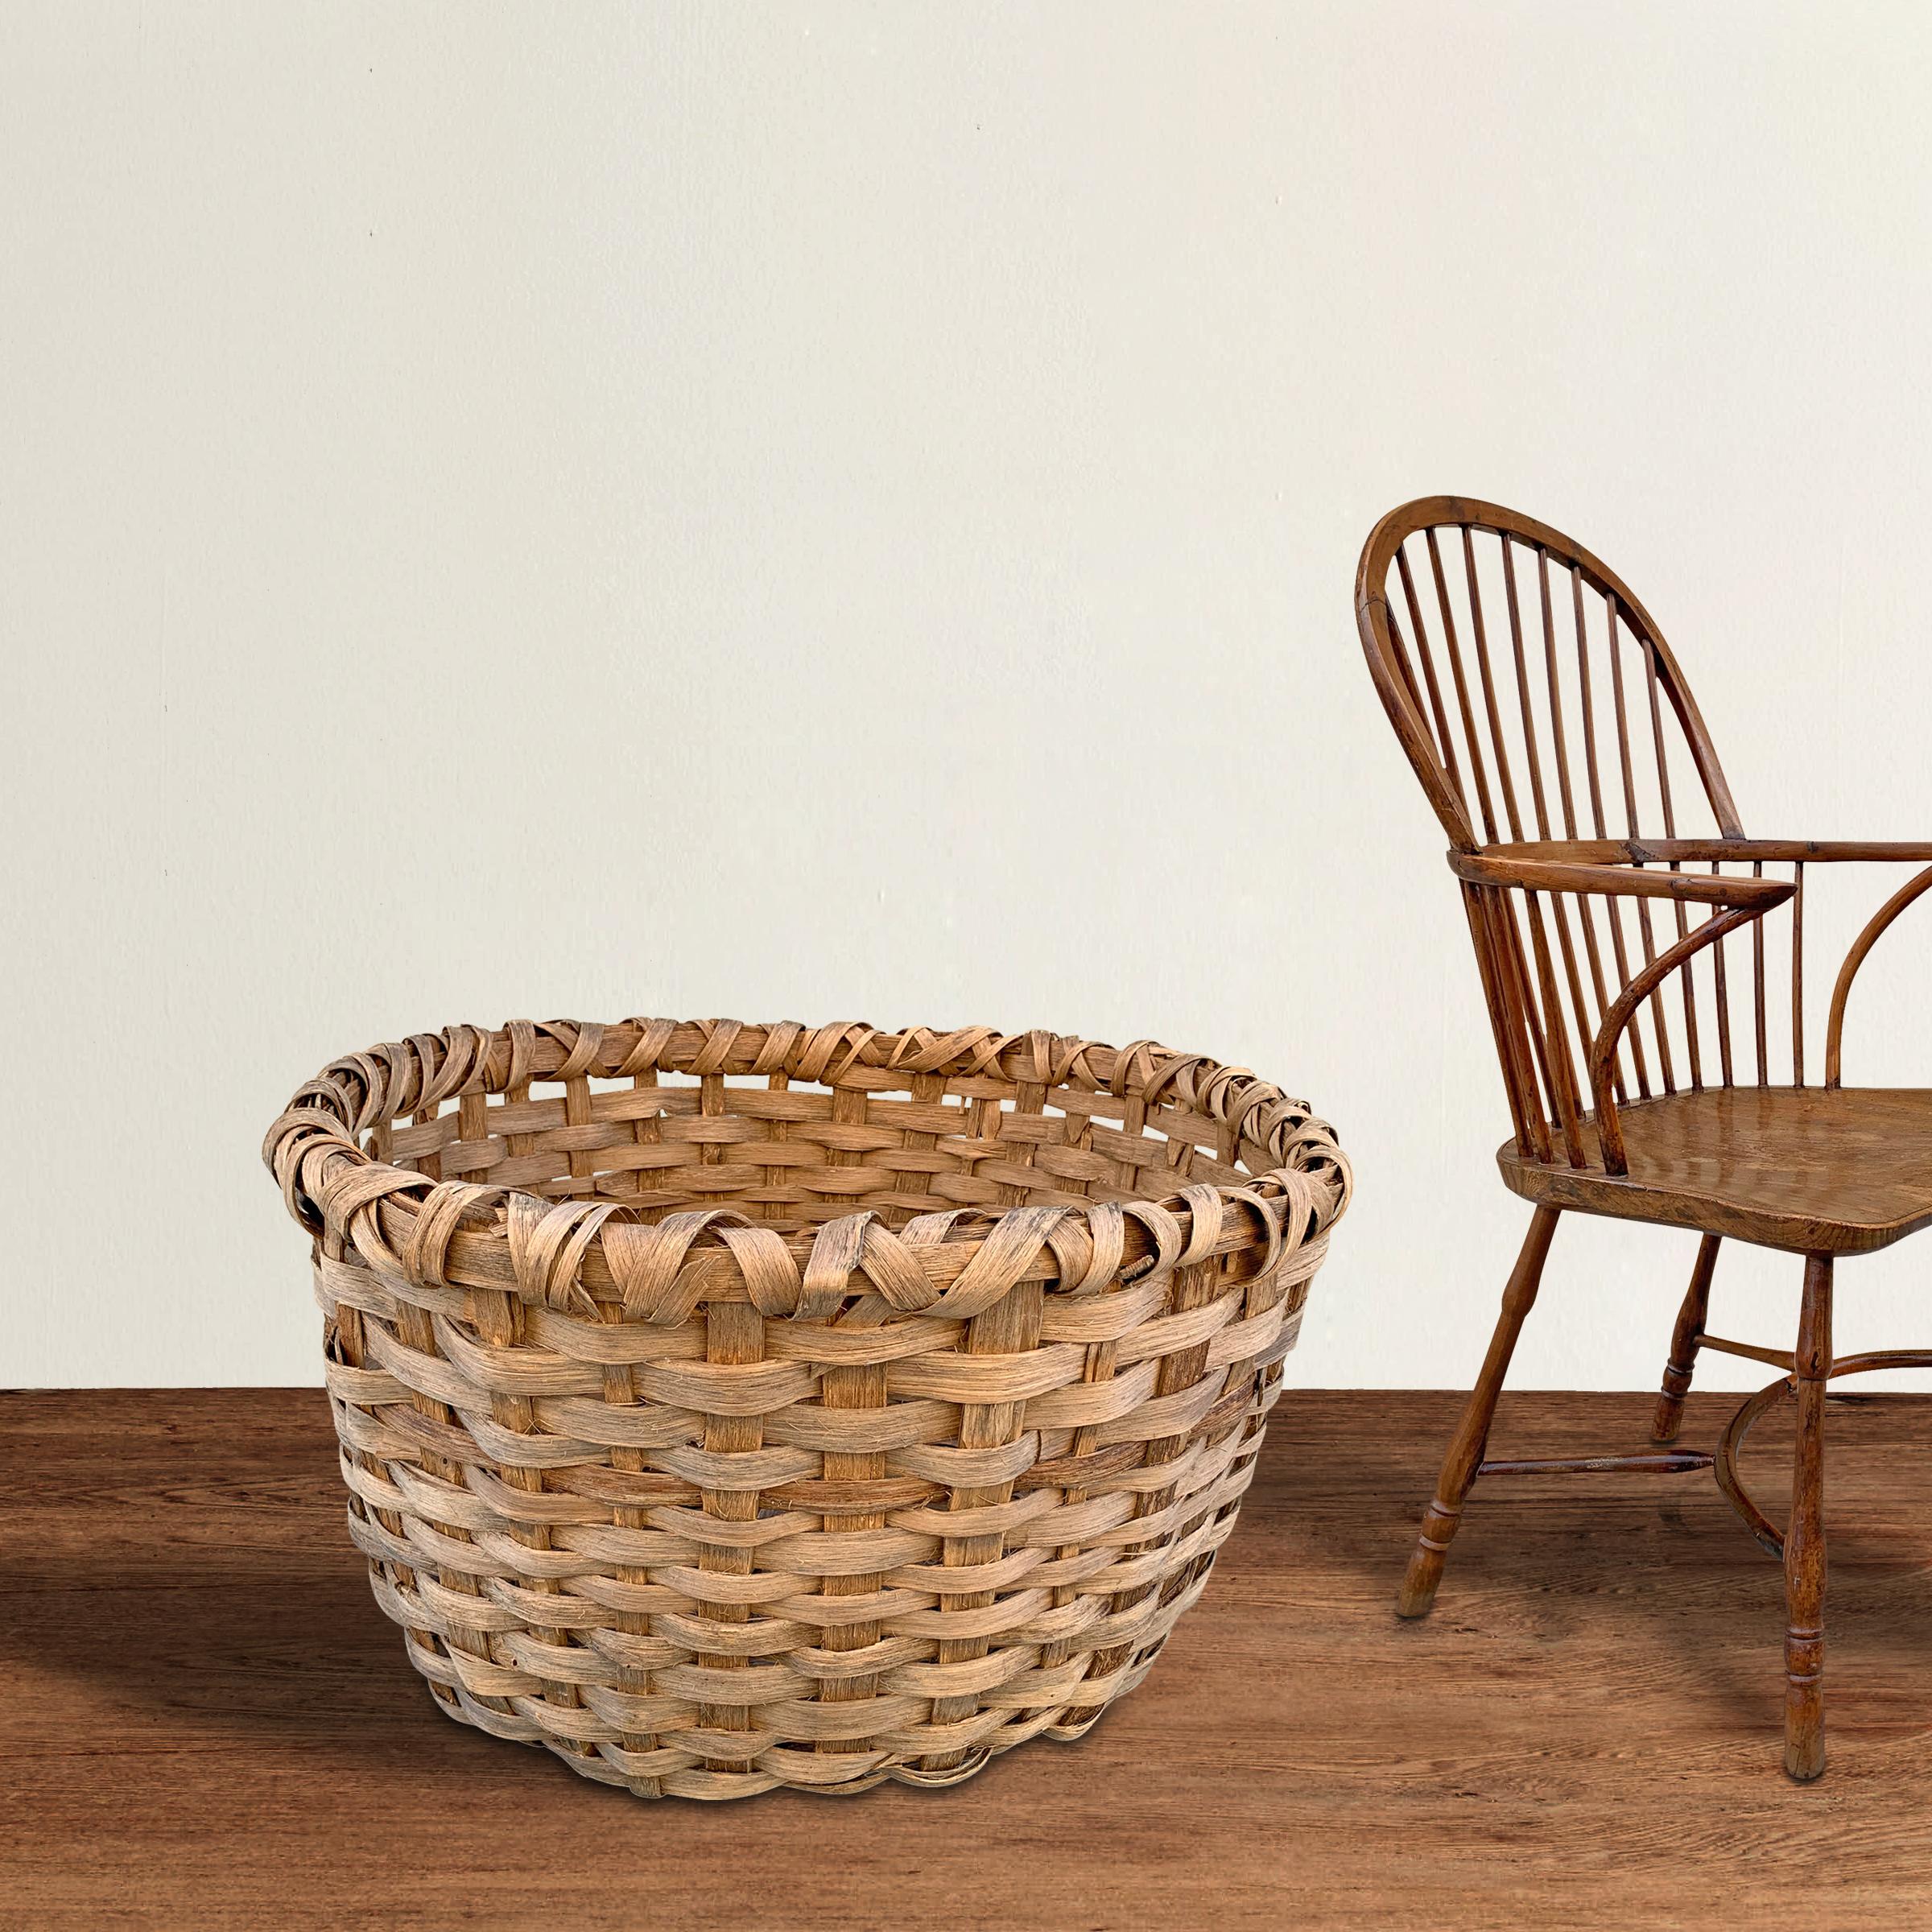 A massive late 19th century American oak splint basket with a double-banded rim and likely used for storing wool in a barn. We've been collecting basket for years, and we've never seen one this large. It's perfect for storing pillows, blankets, or